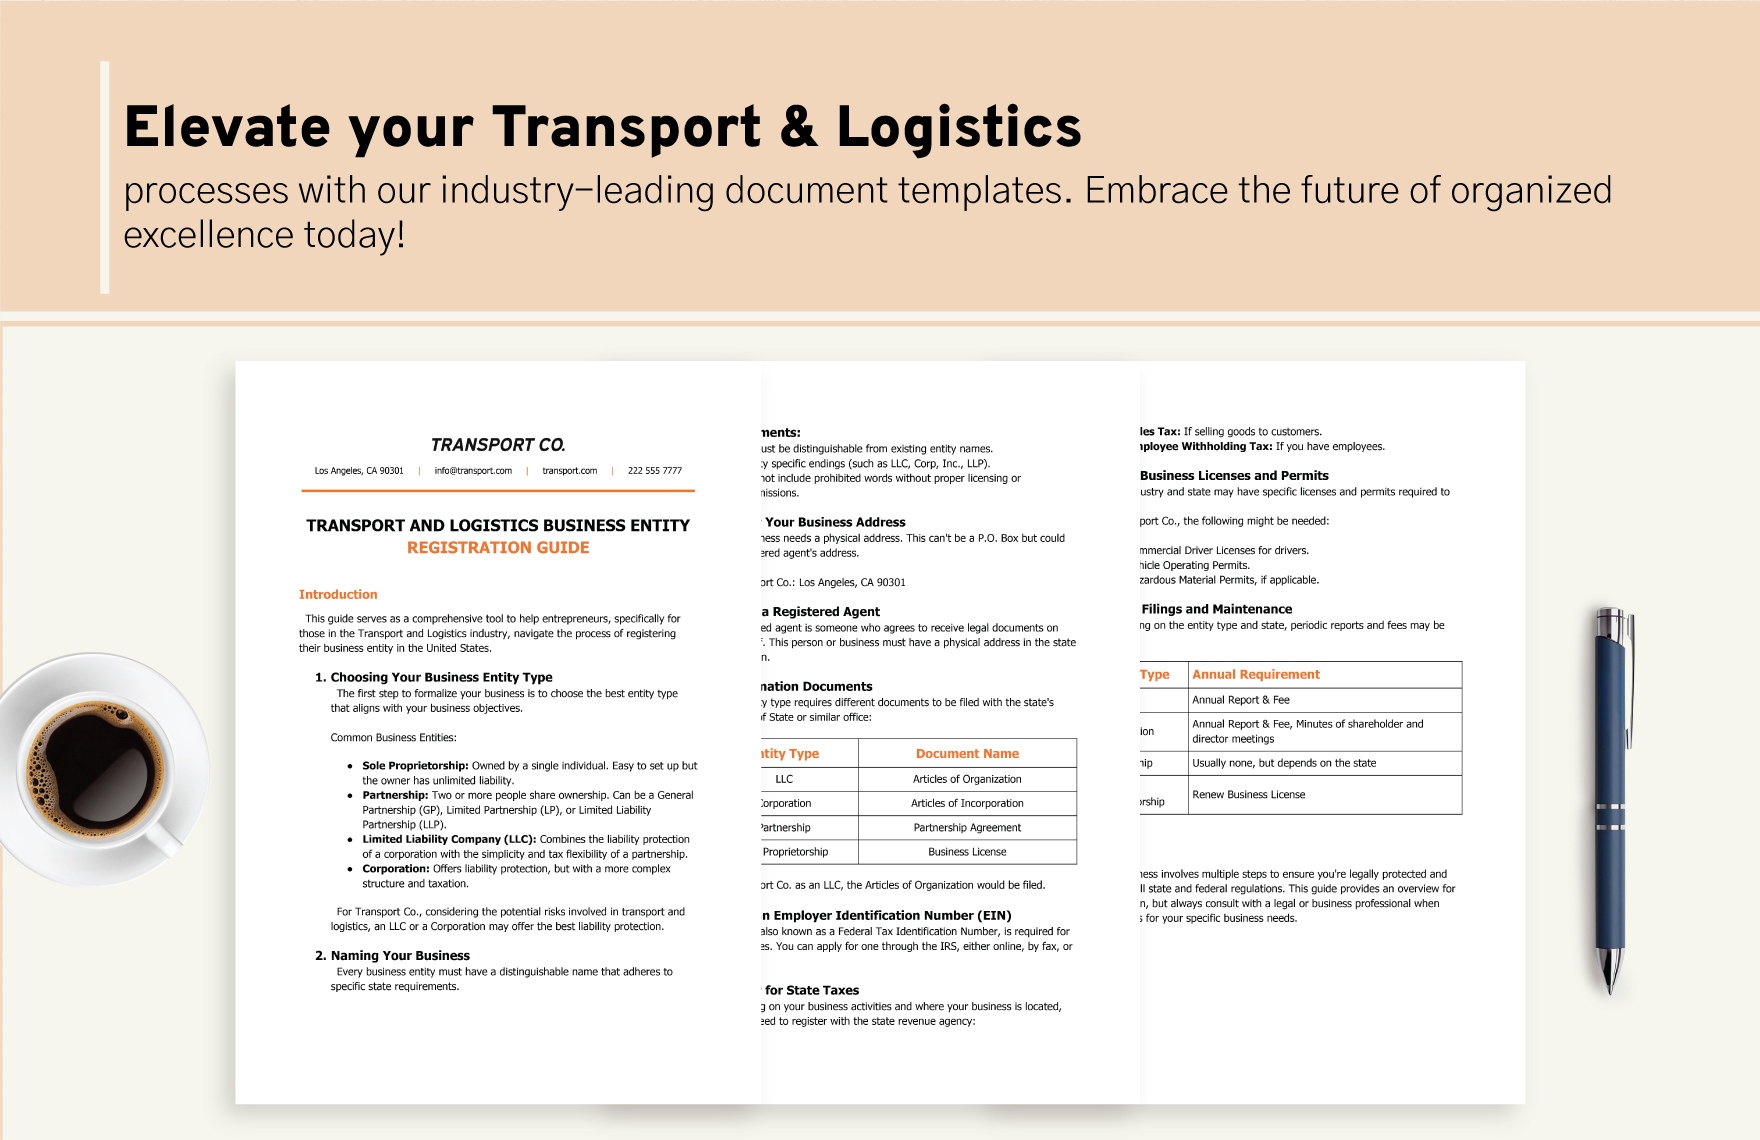 Transport and Logistics Business Entity Registration Guide Template